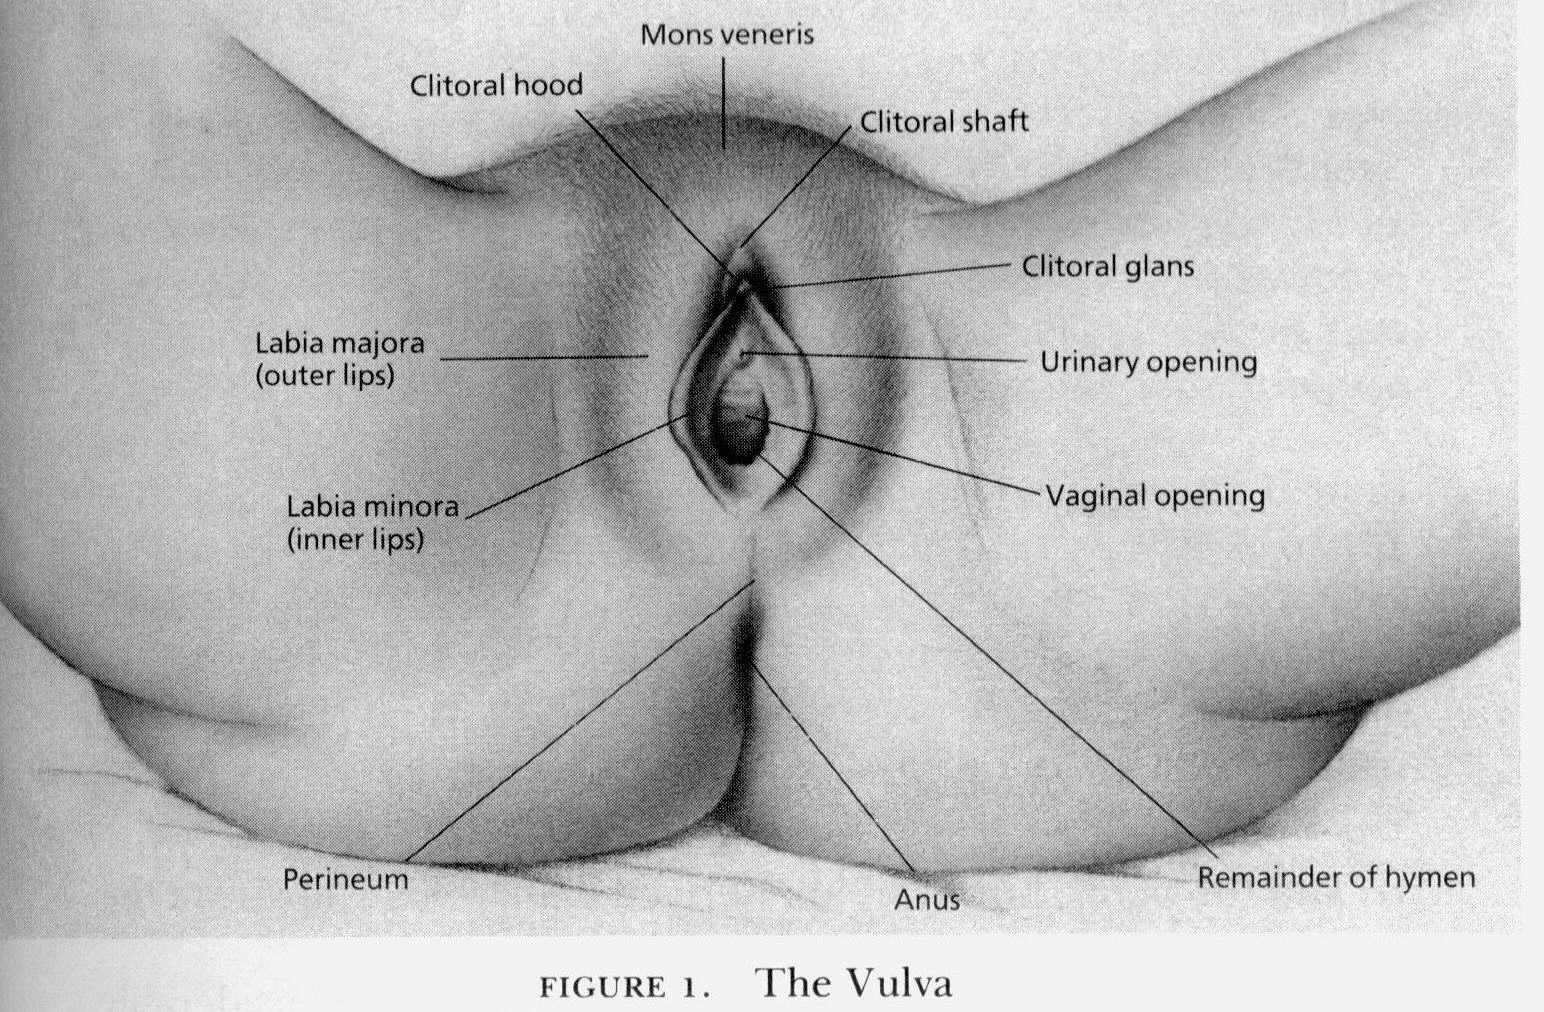 How vagina and penis meets